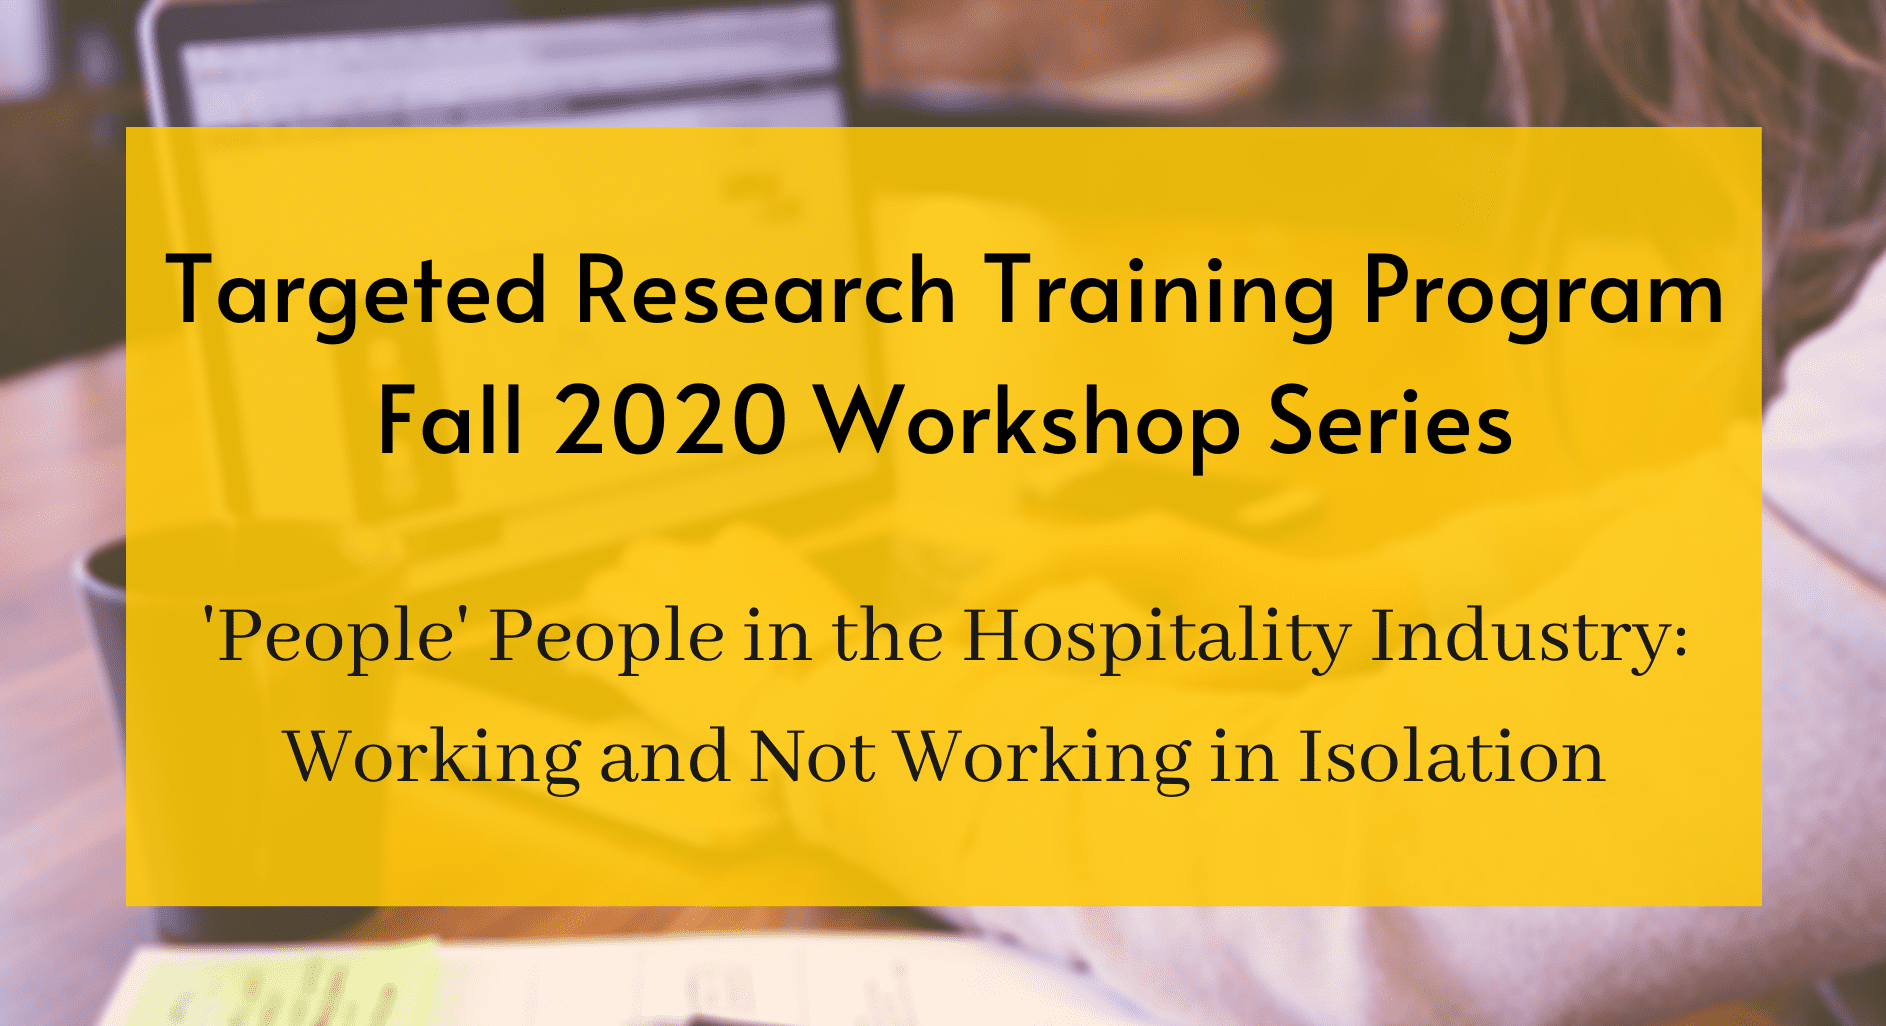 Targeted Research Training Program Fall 2020 Workshop Series, "People" People in the Hospitality Industry: Working and Not Working in Isolation